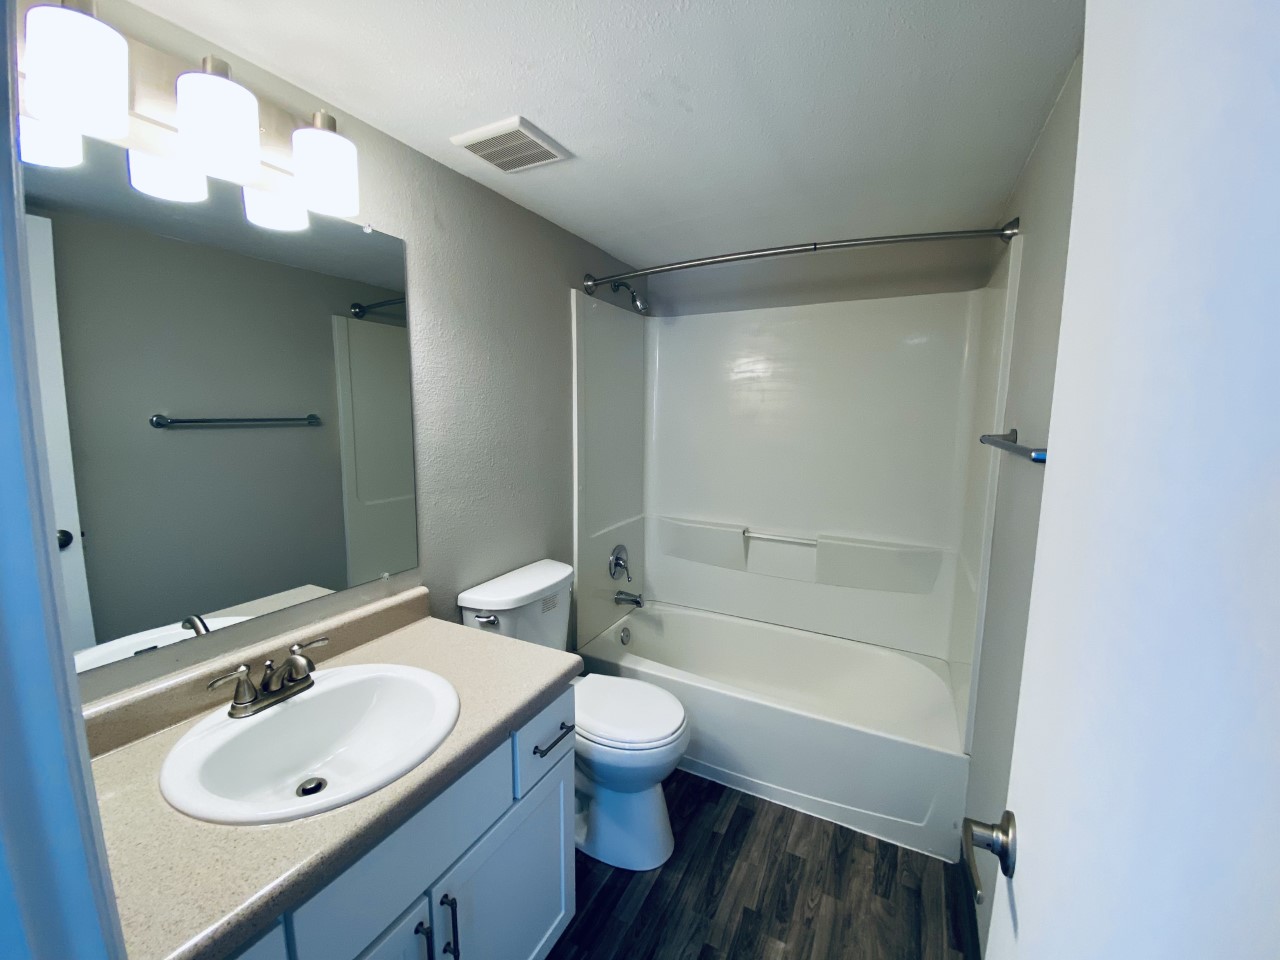 Vinyl-floored bathroom with counter and shower bathtub combination.